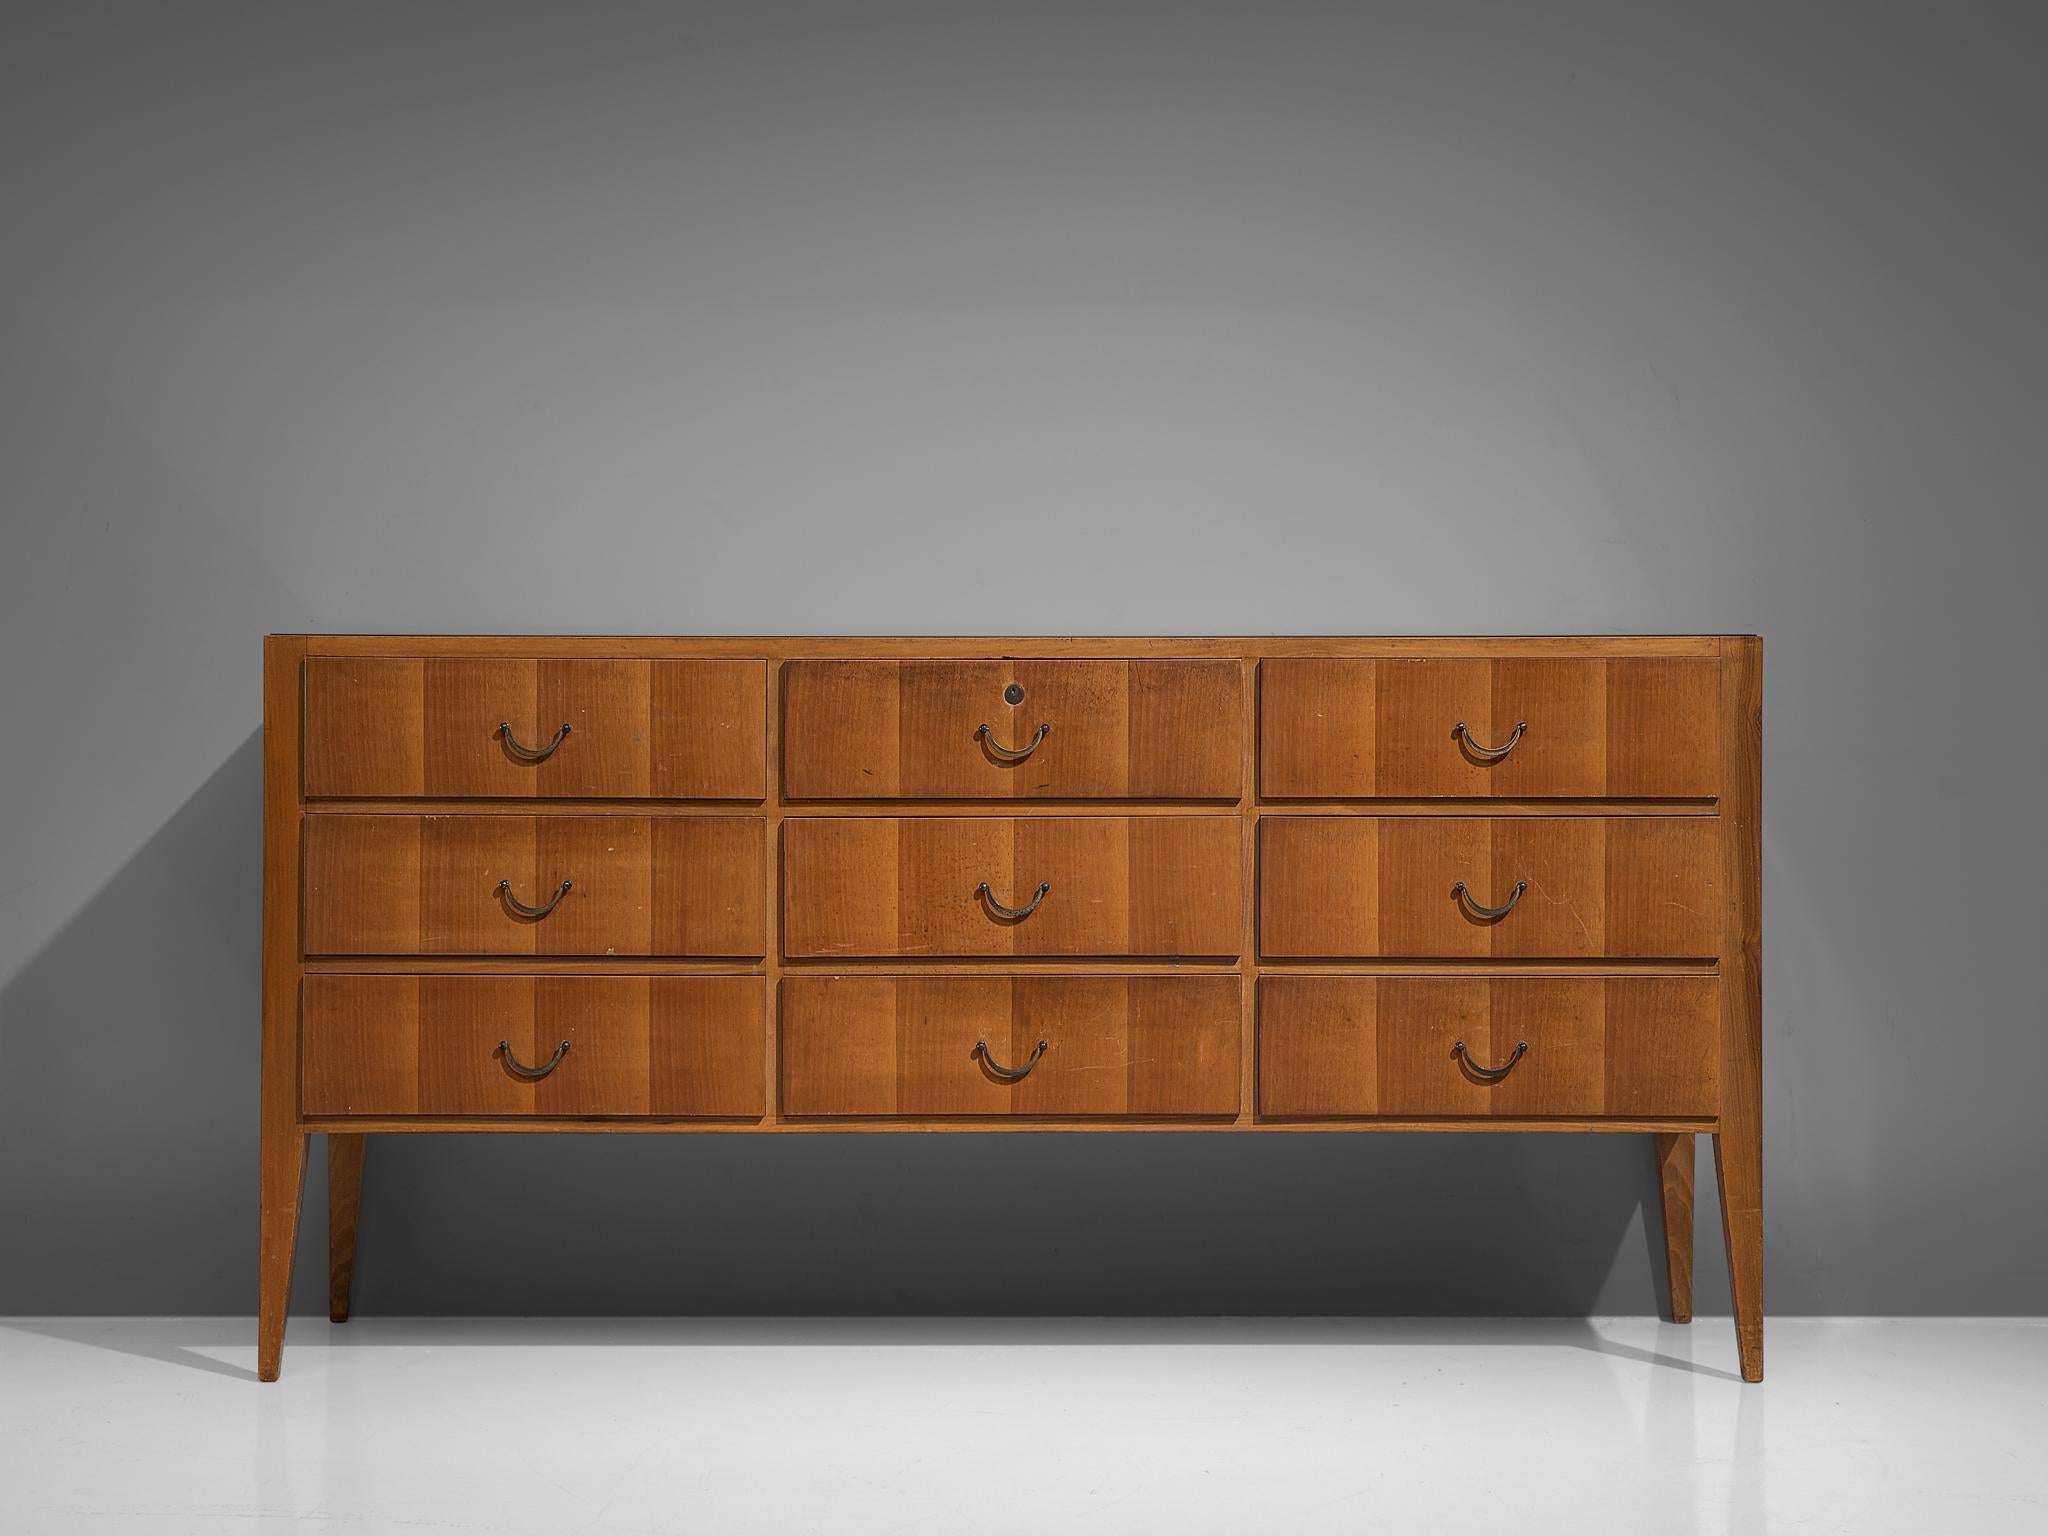 Mid-20th Century Cabinet with Drawers in Walnut and Brass, Italy, 1950s